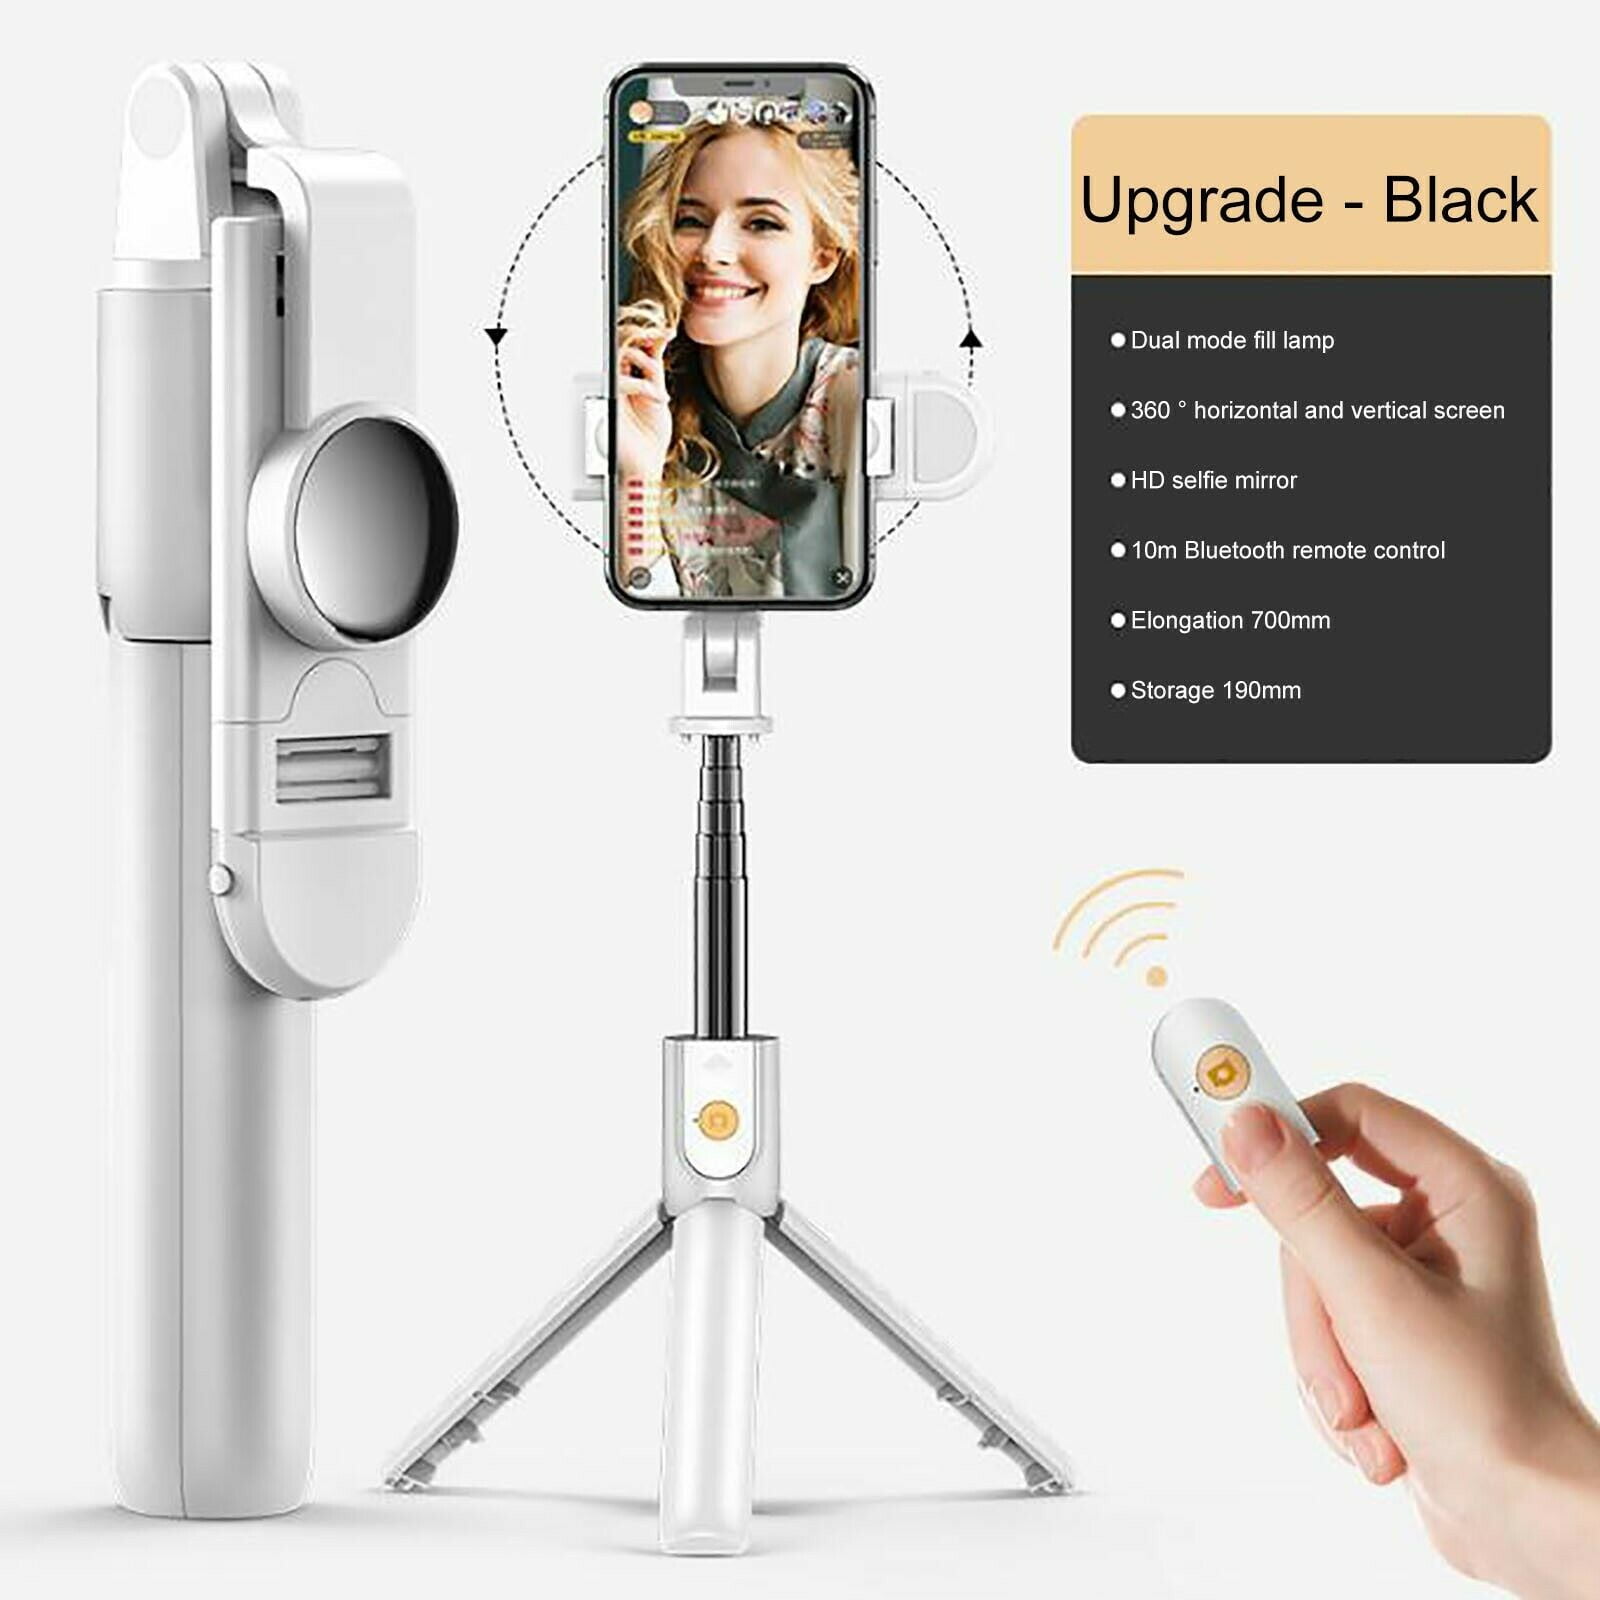 Android and Tablets WHITE Wireless Bluetooth Remote Shutter Control with Camera Activation used with Monopod Selfie Stick for Apple iPhone 6 Plus Iphone 5 4 iOS